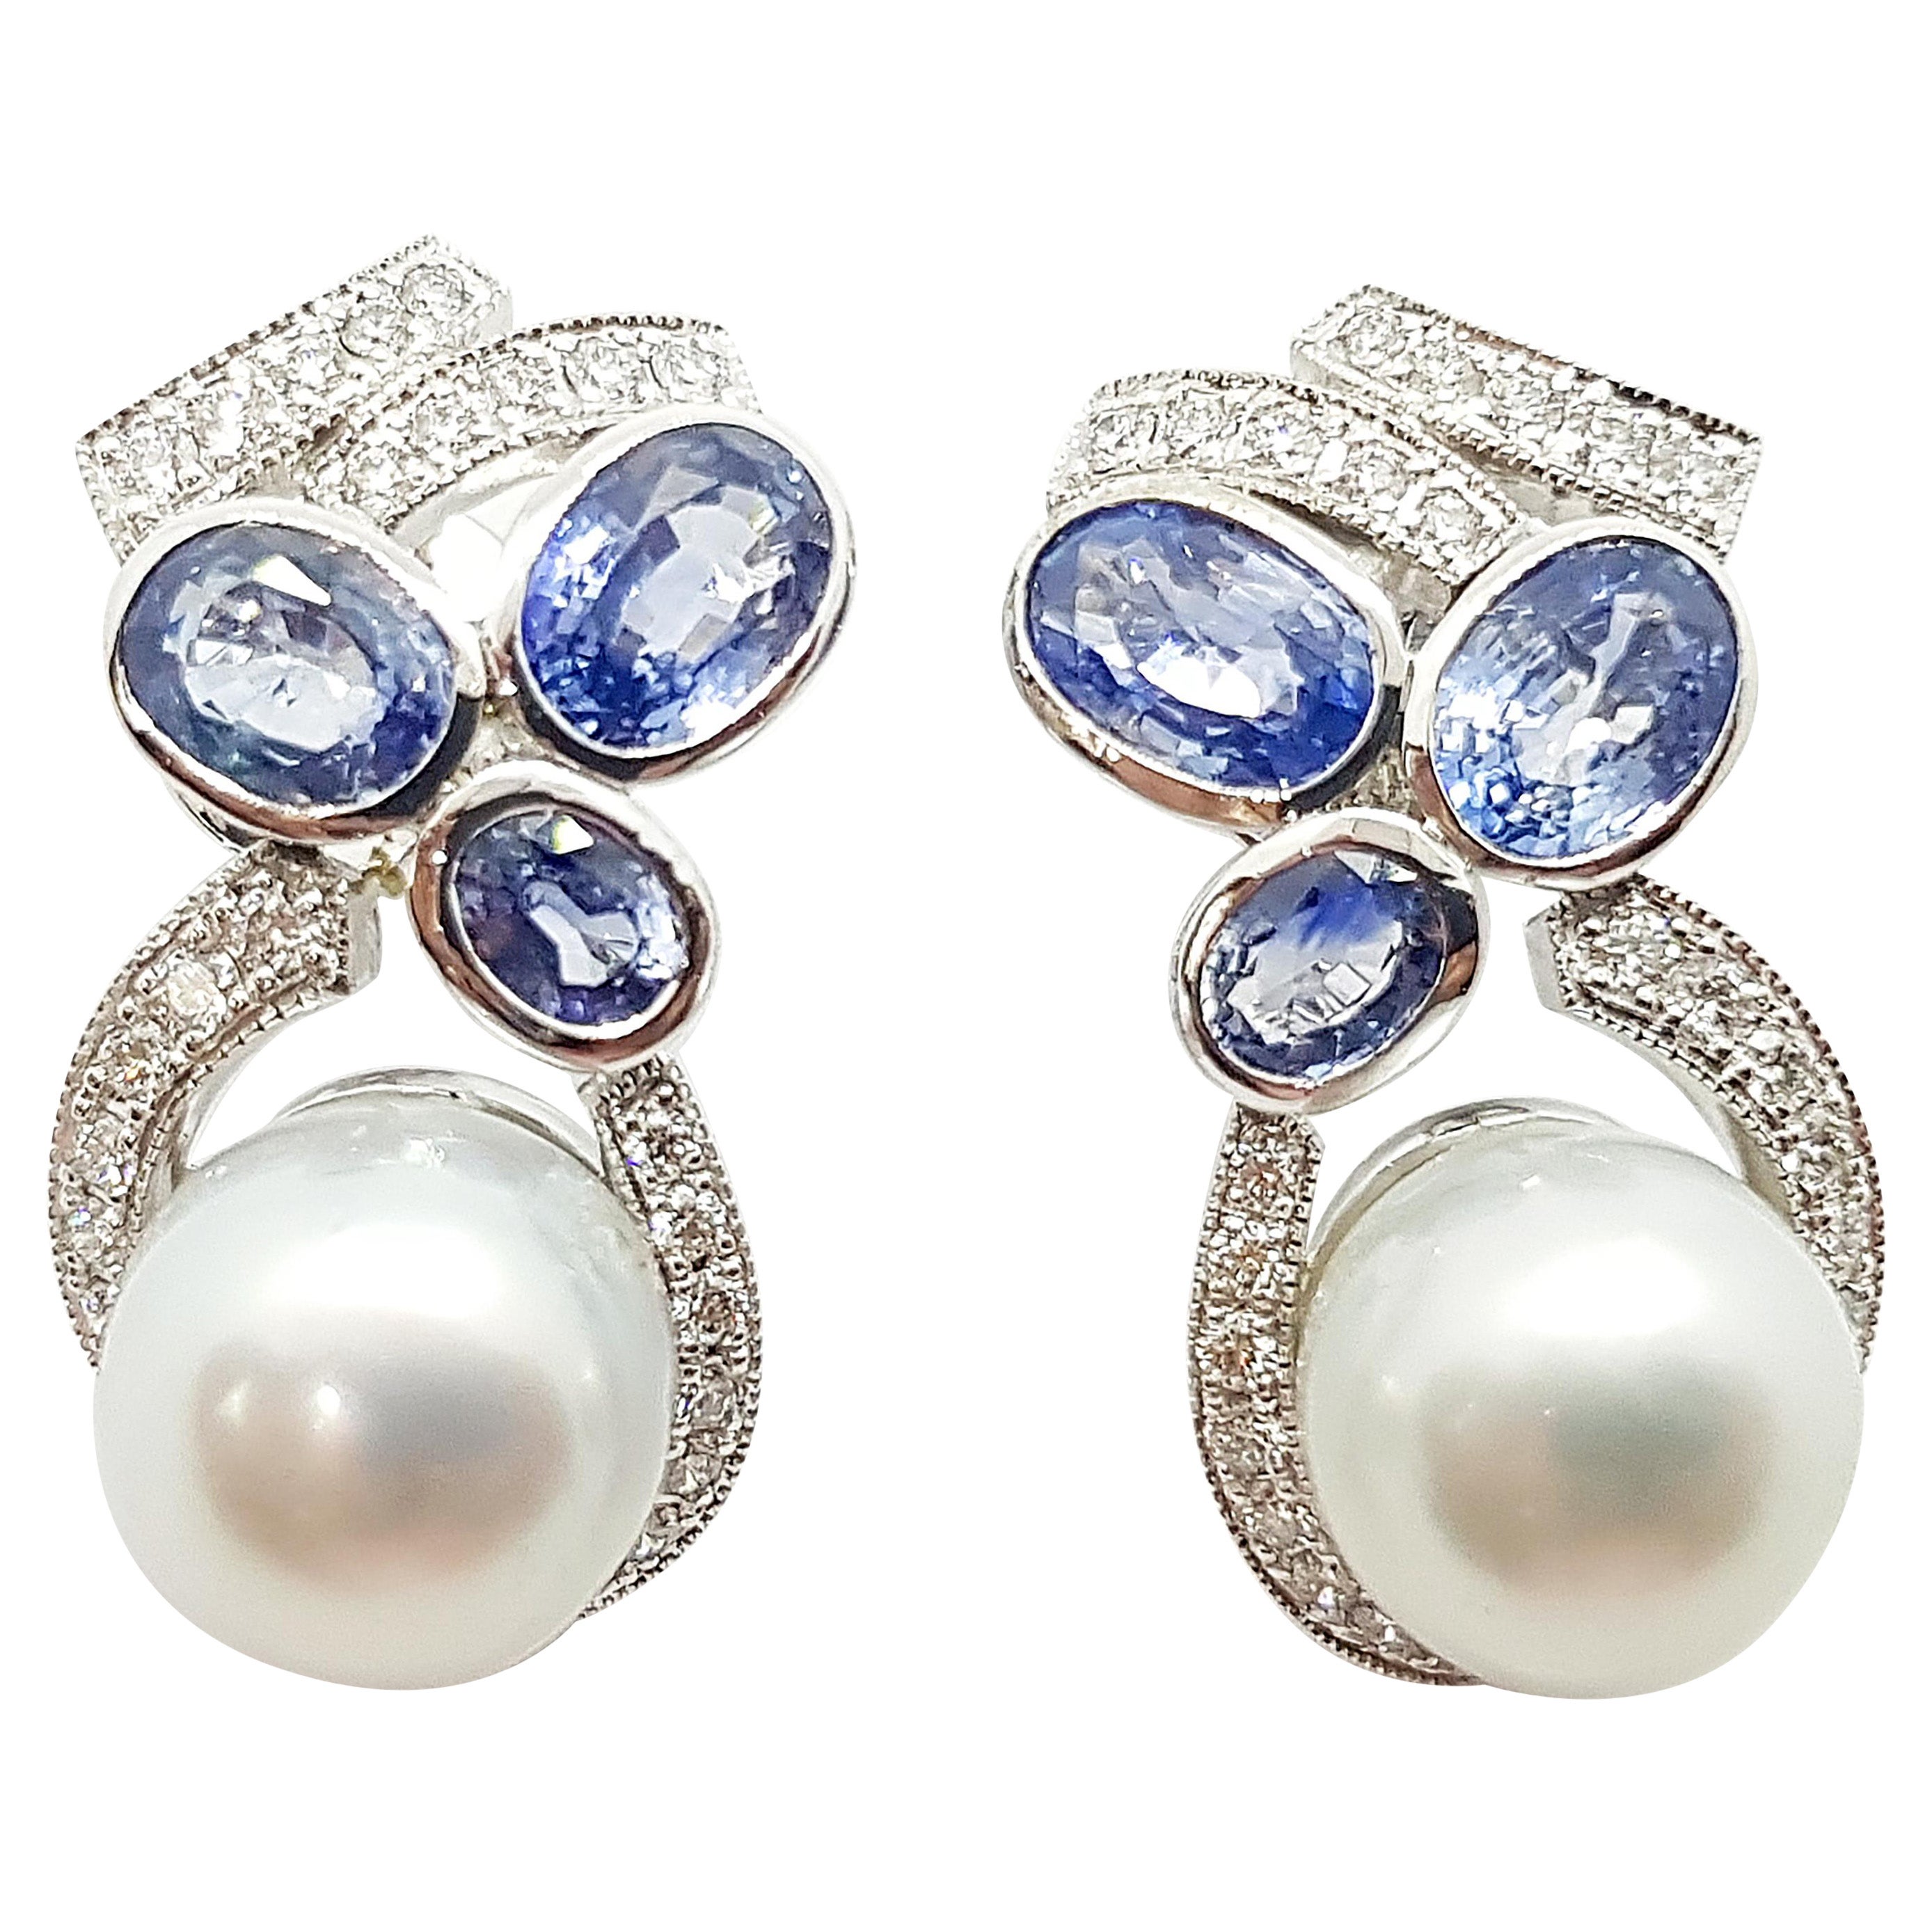 South Sea Pearl and Blue Sapphire with Diamond Earrings in 18 Karat White Gold